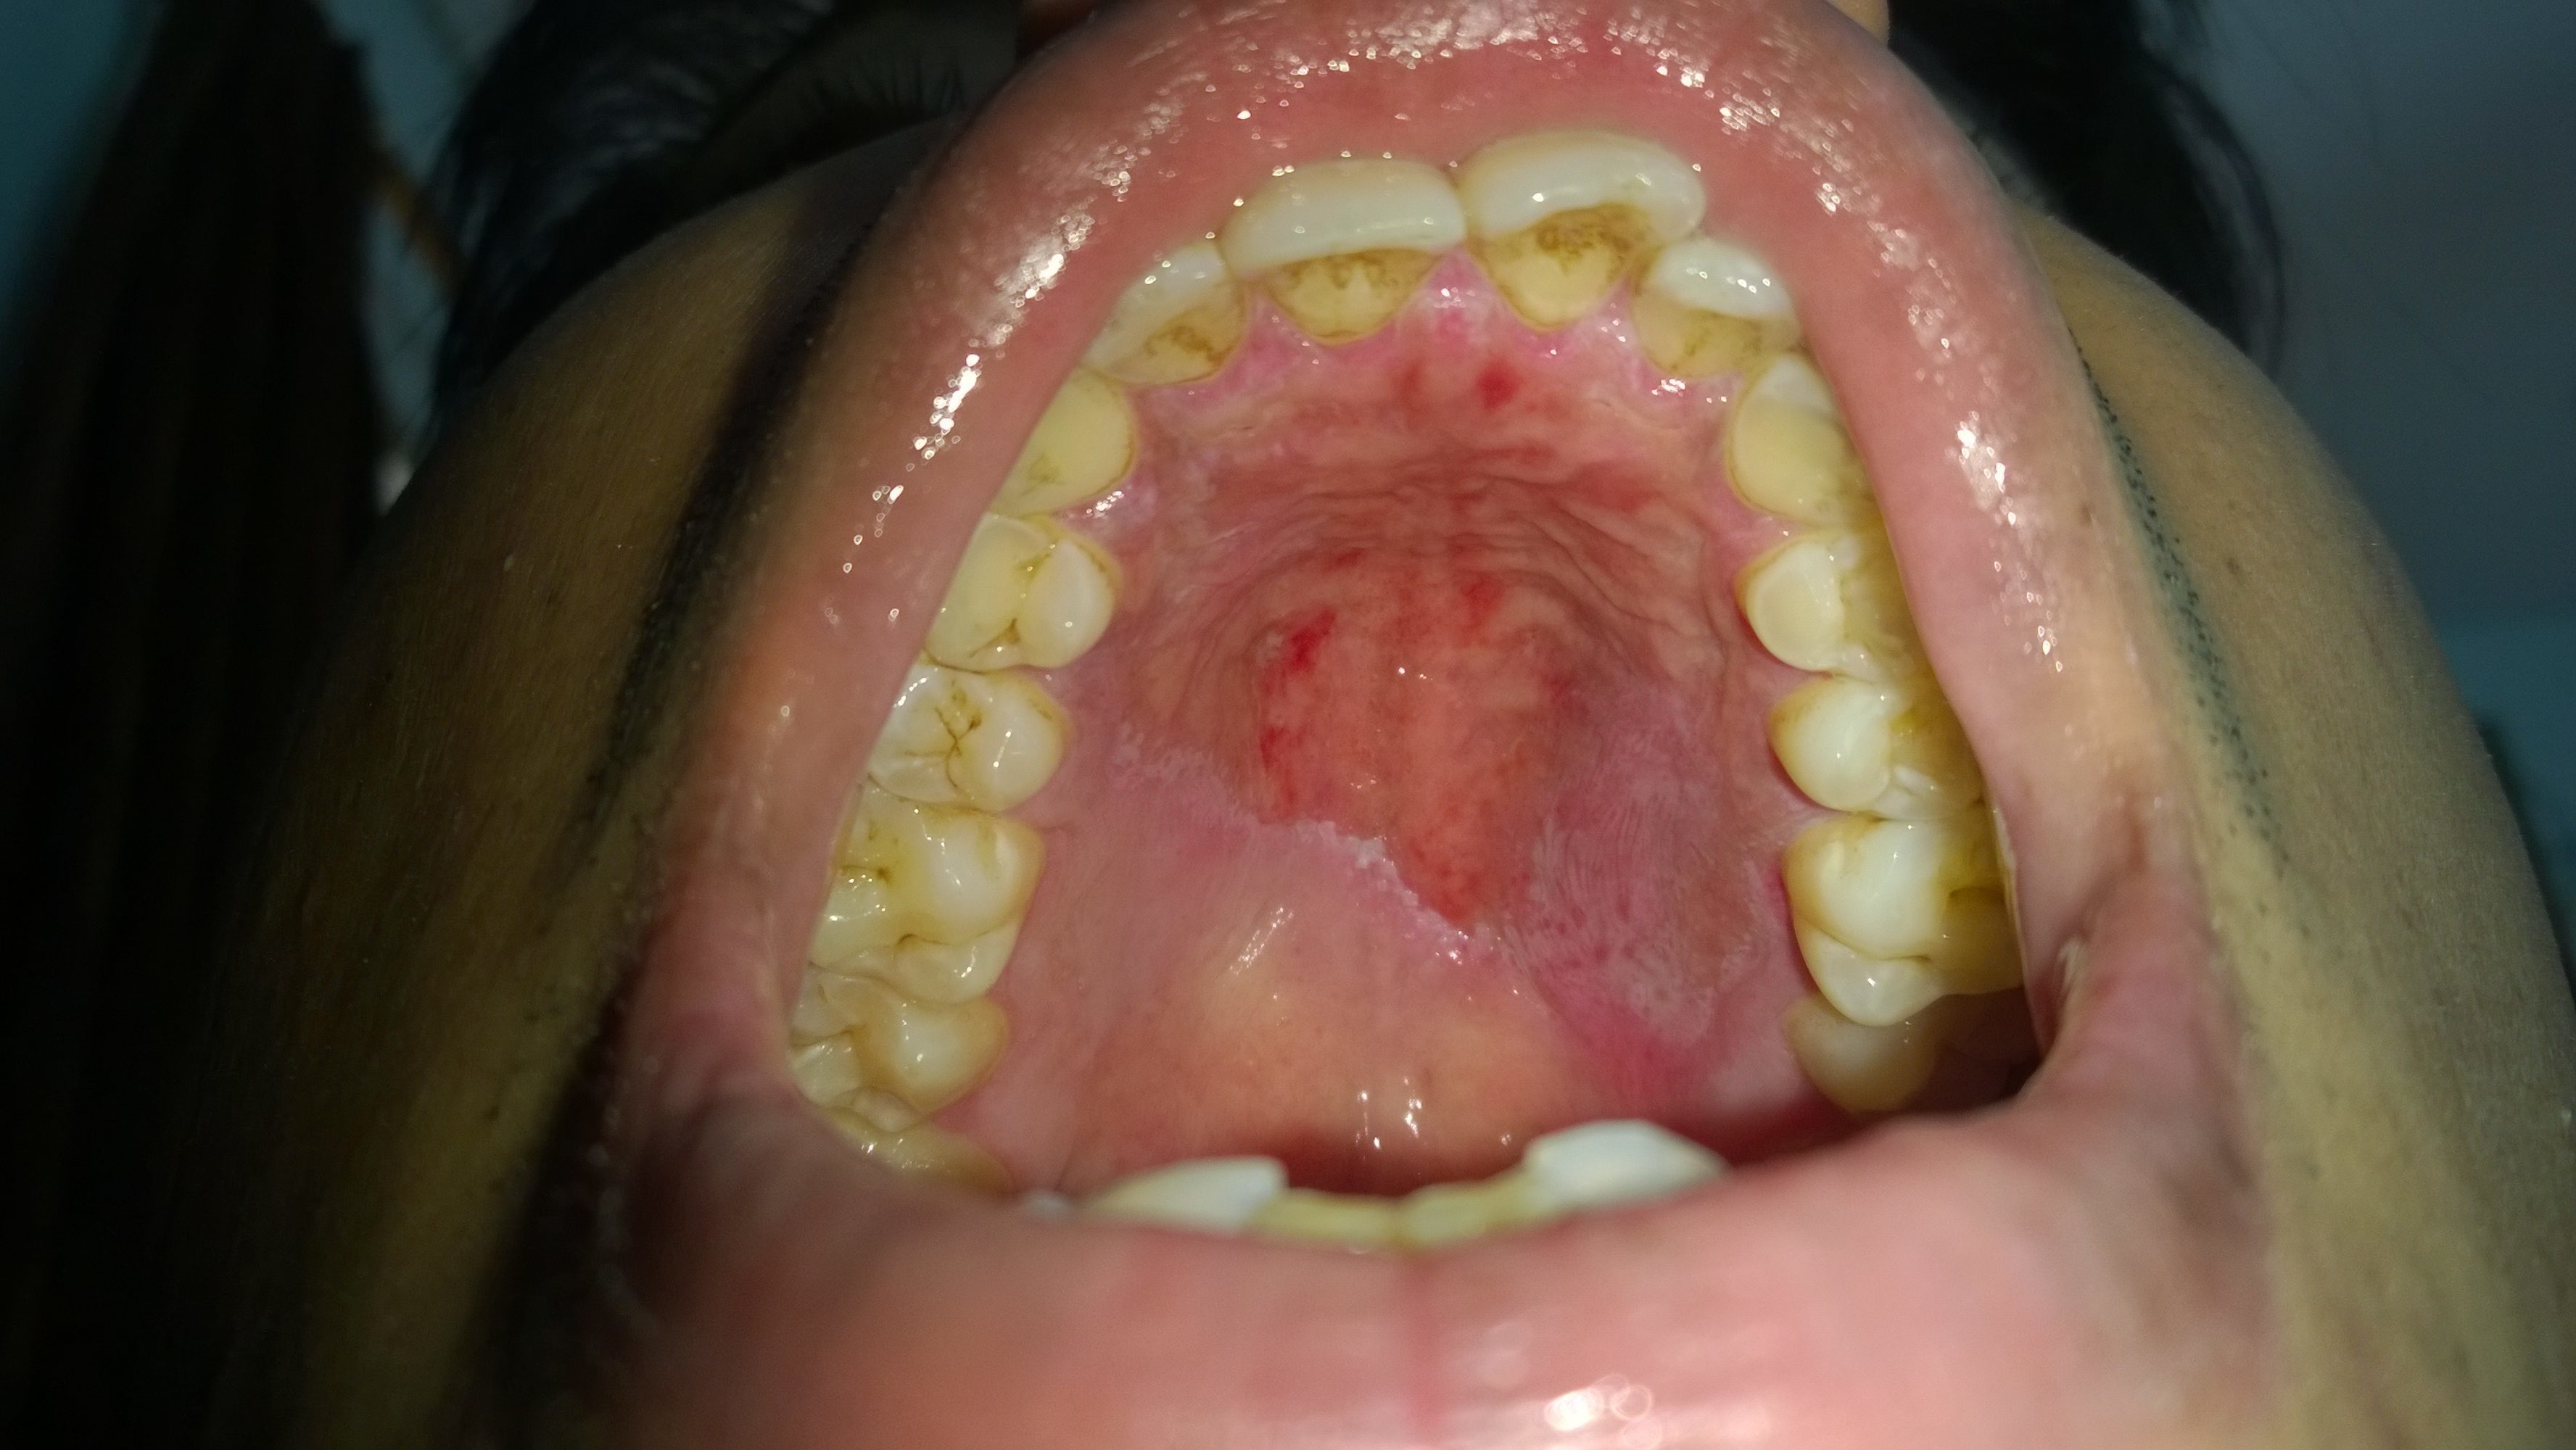 sore inside mouth